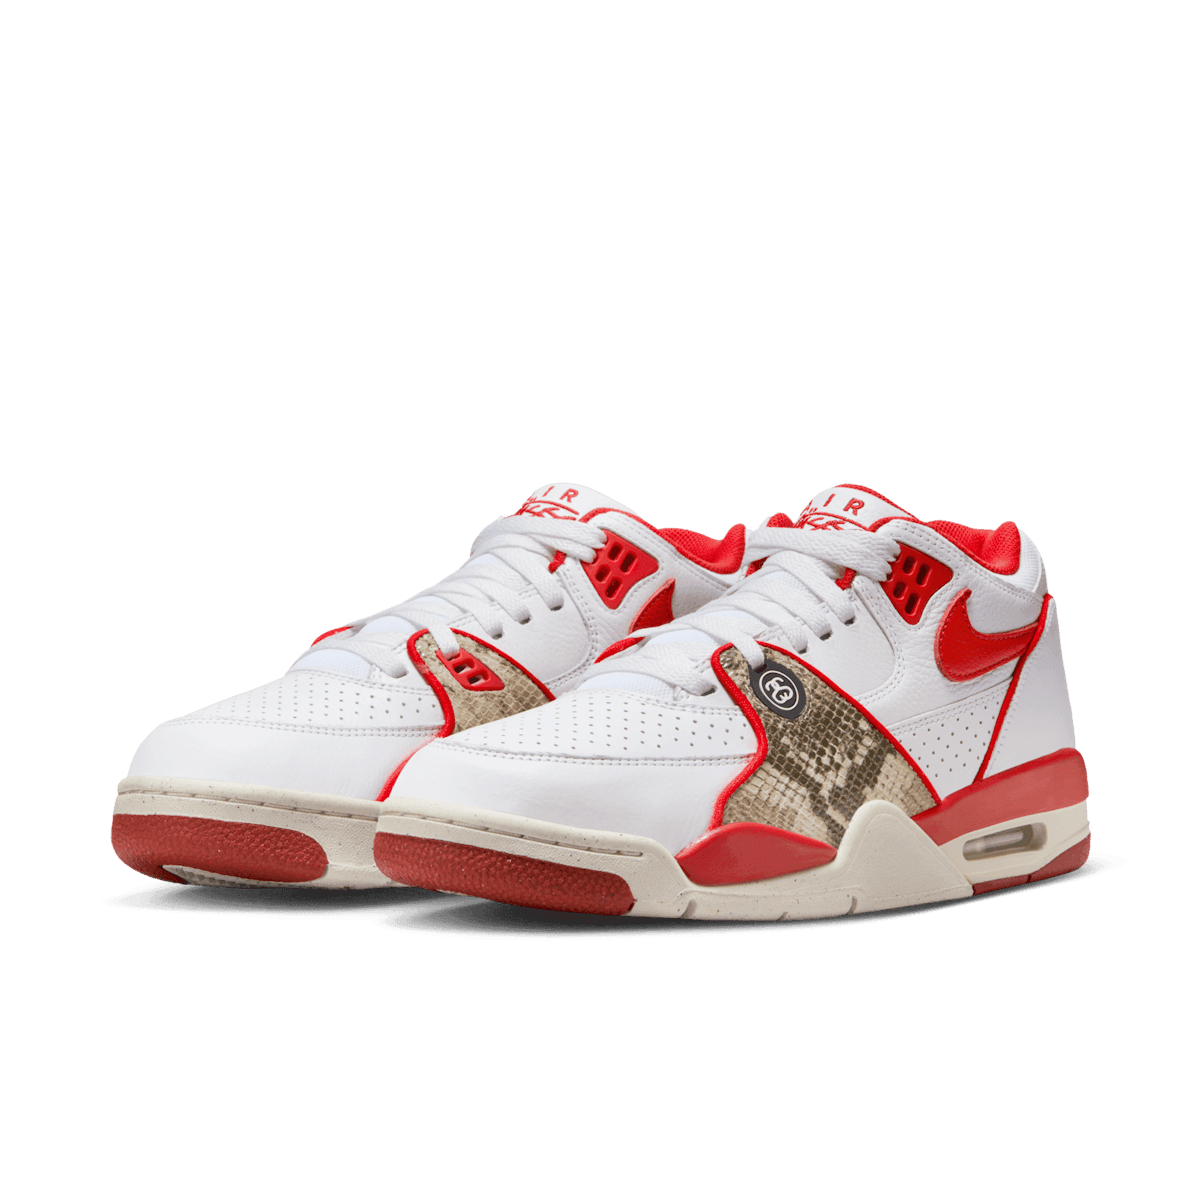 Nike Air Flight 89 Low SP Stussy White Habanero Red Angle 2